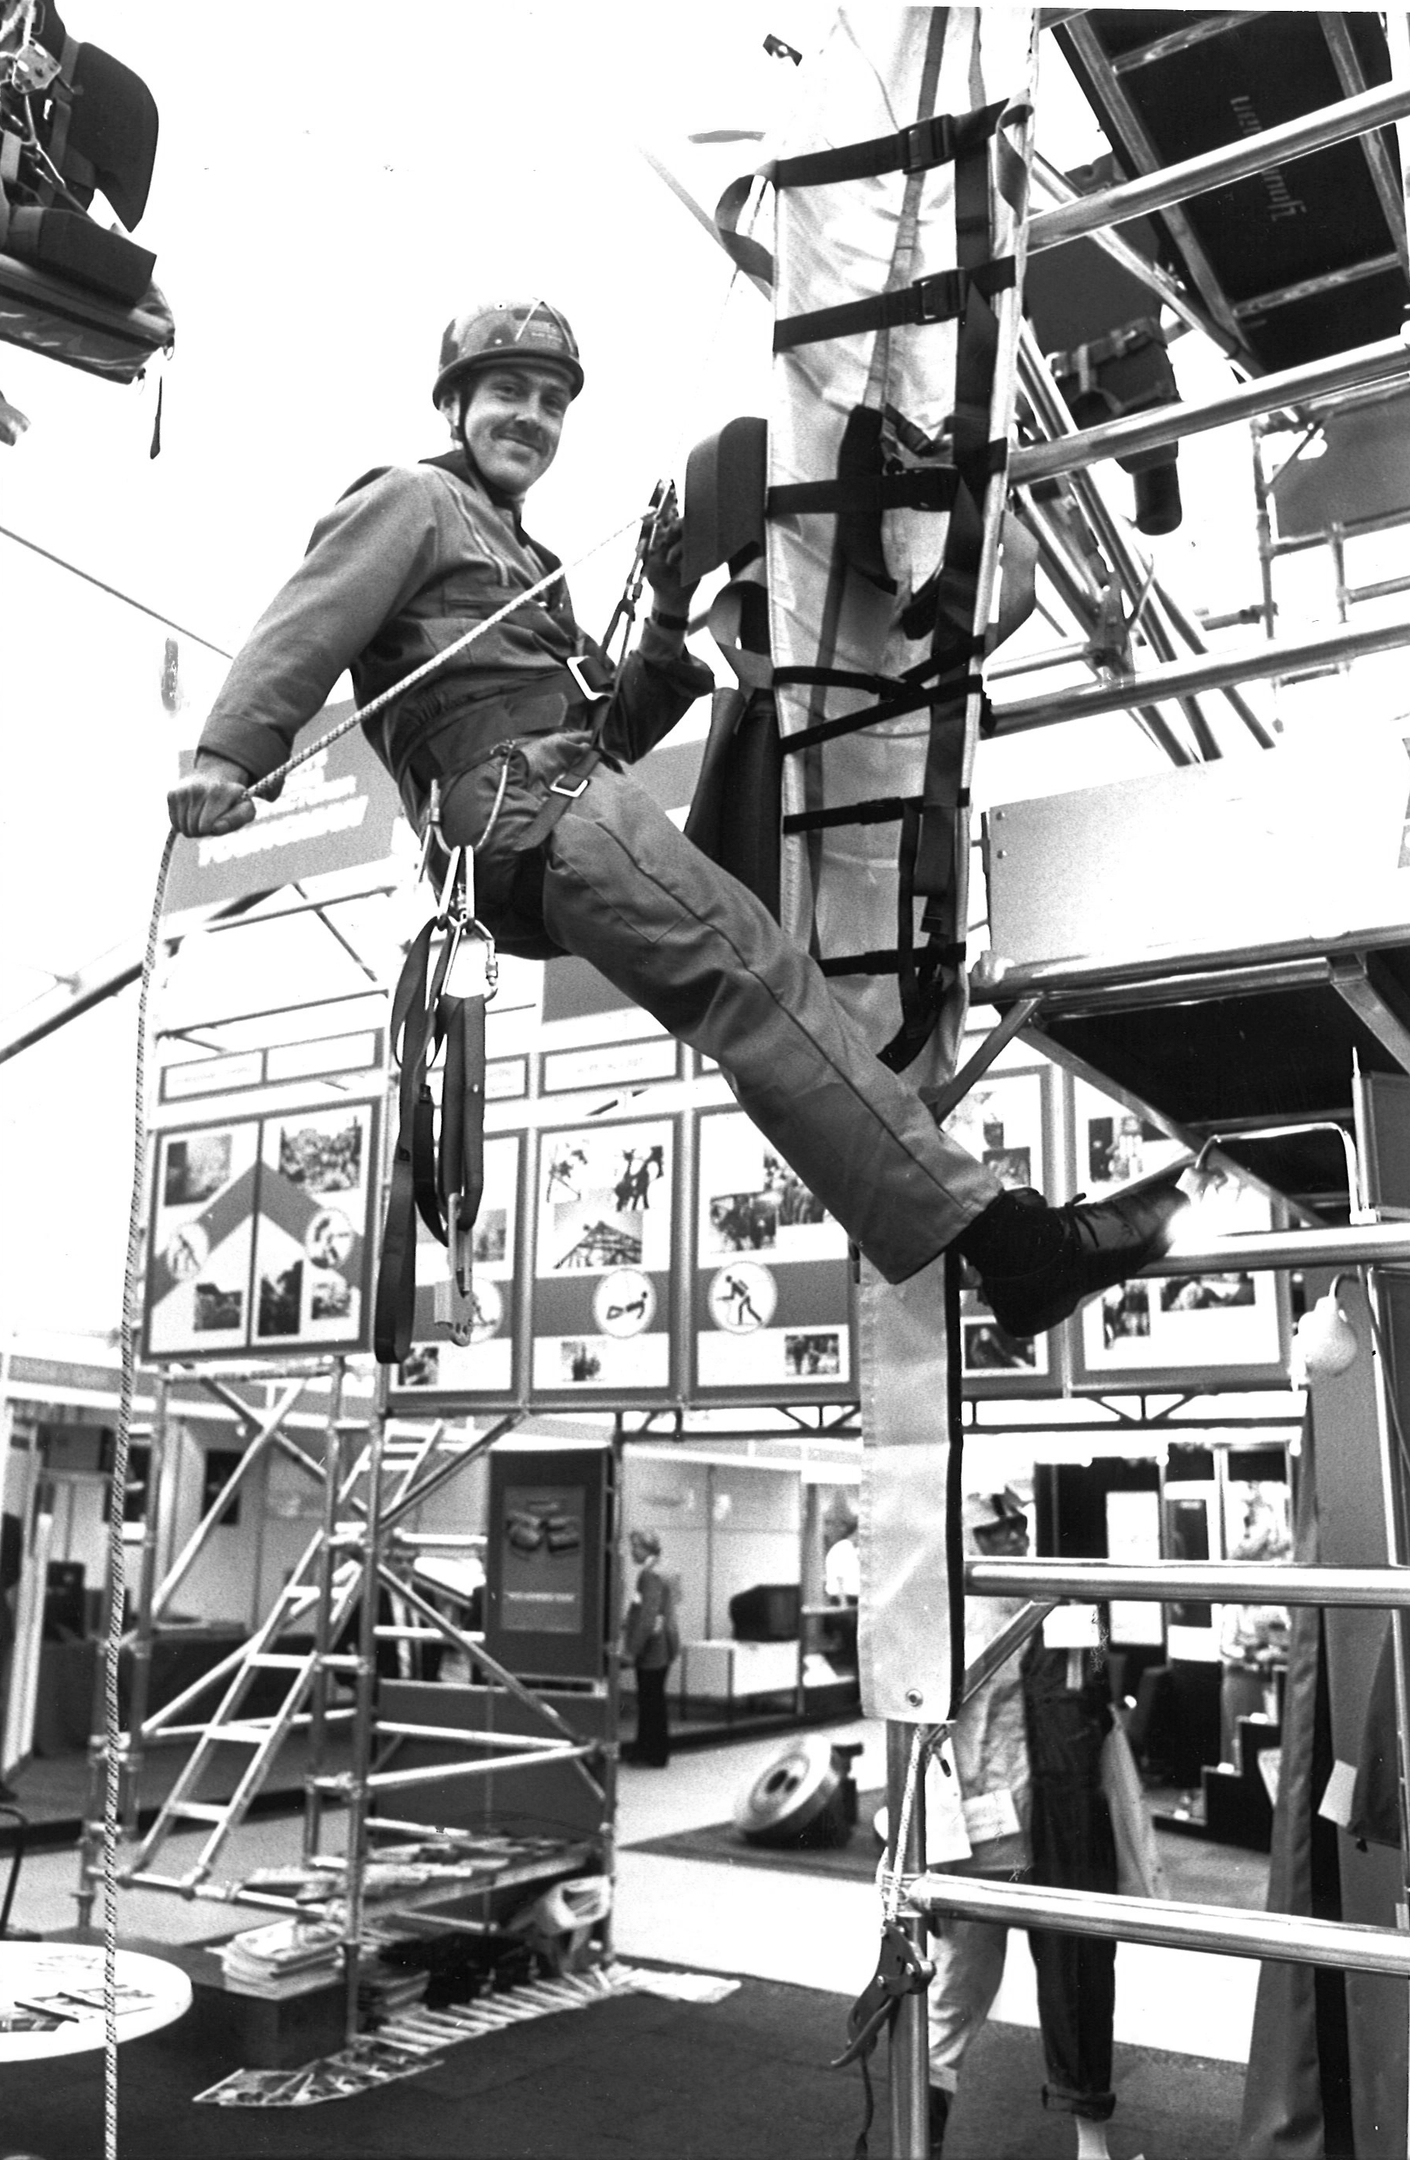 Rope Access training demonstration from Fireman Alan Davie at Offshore Europe 1989